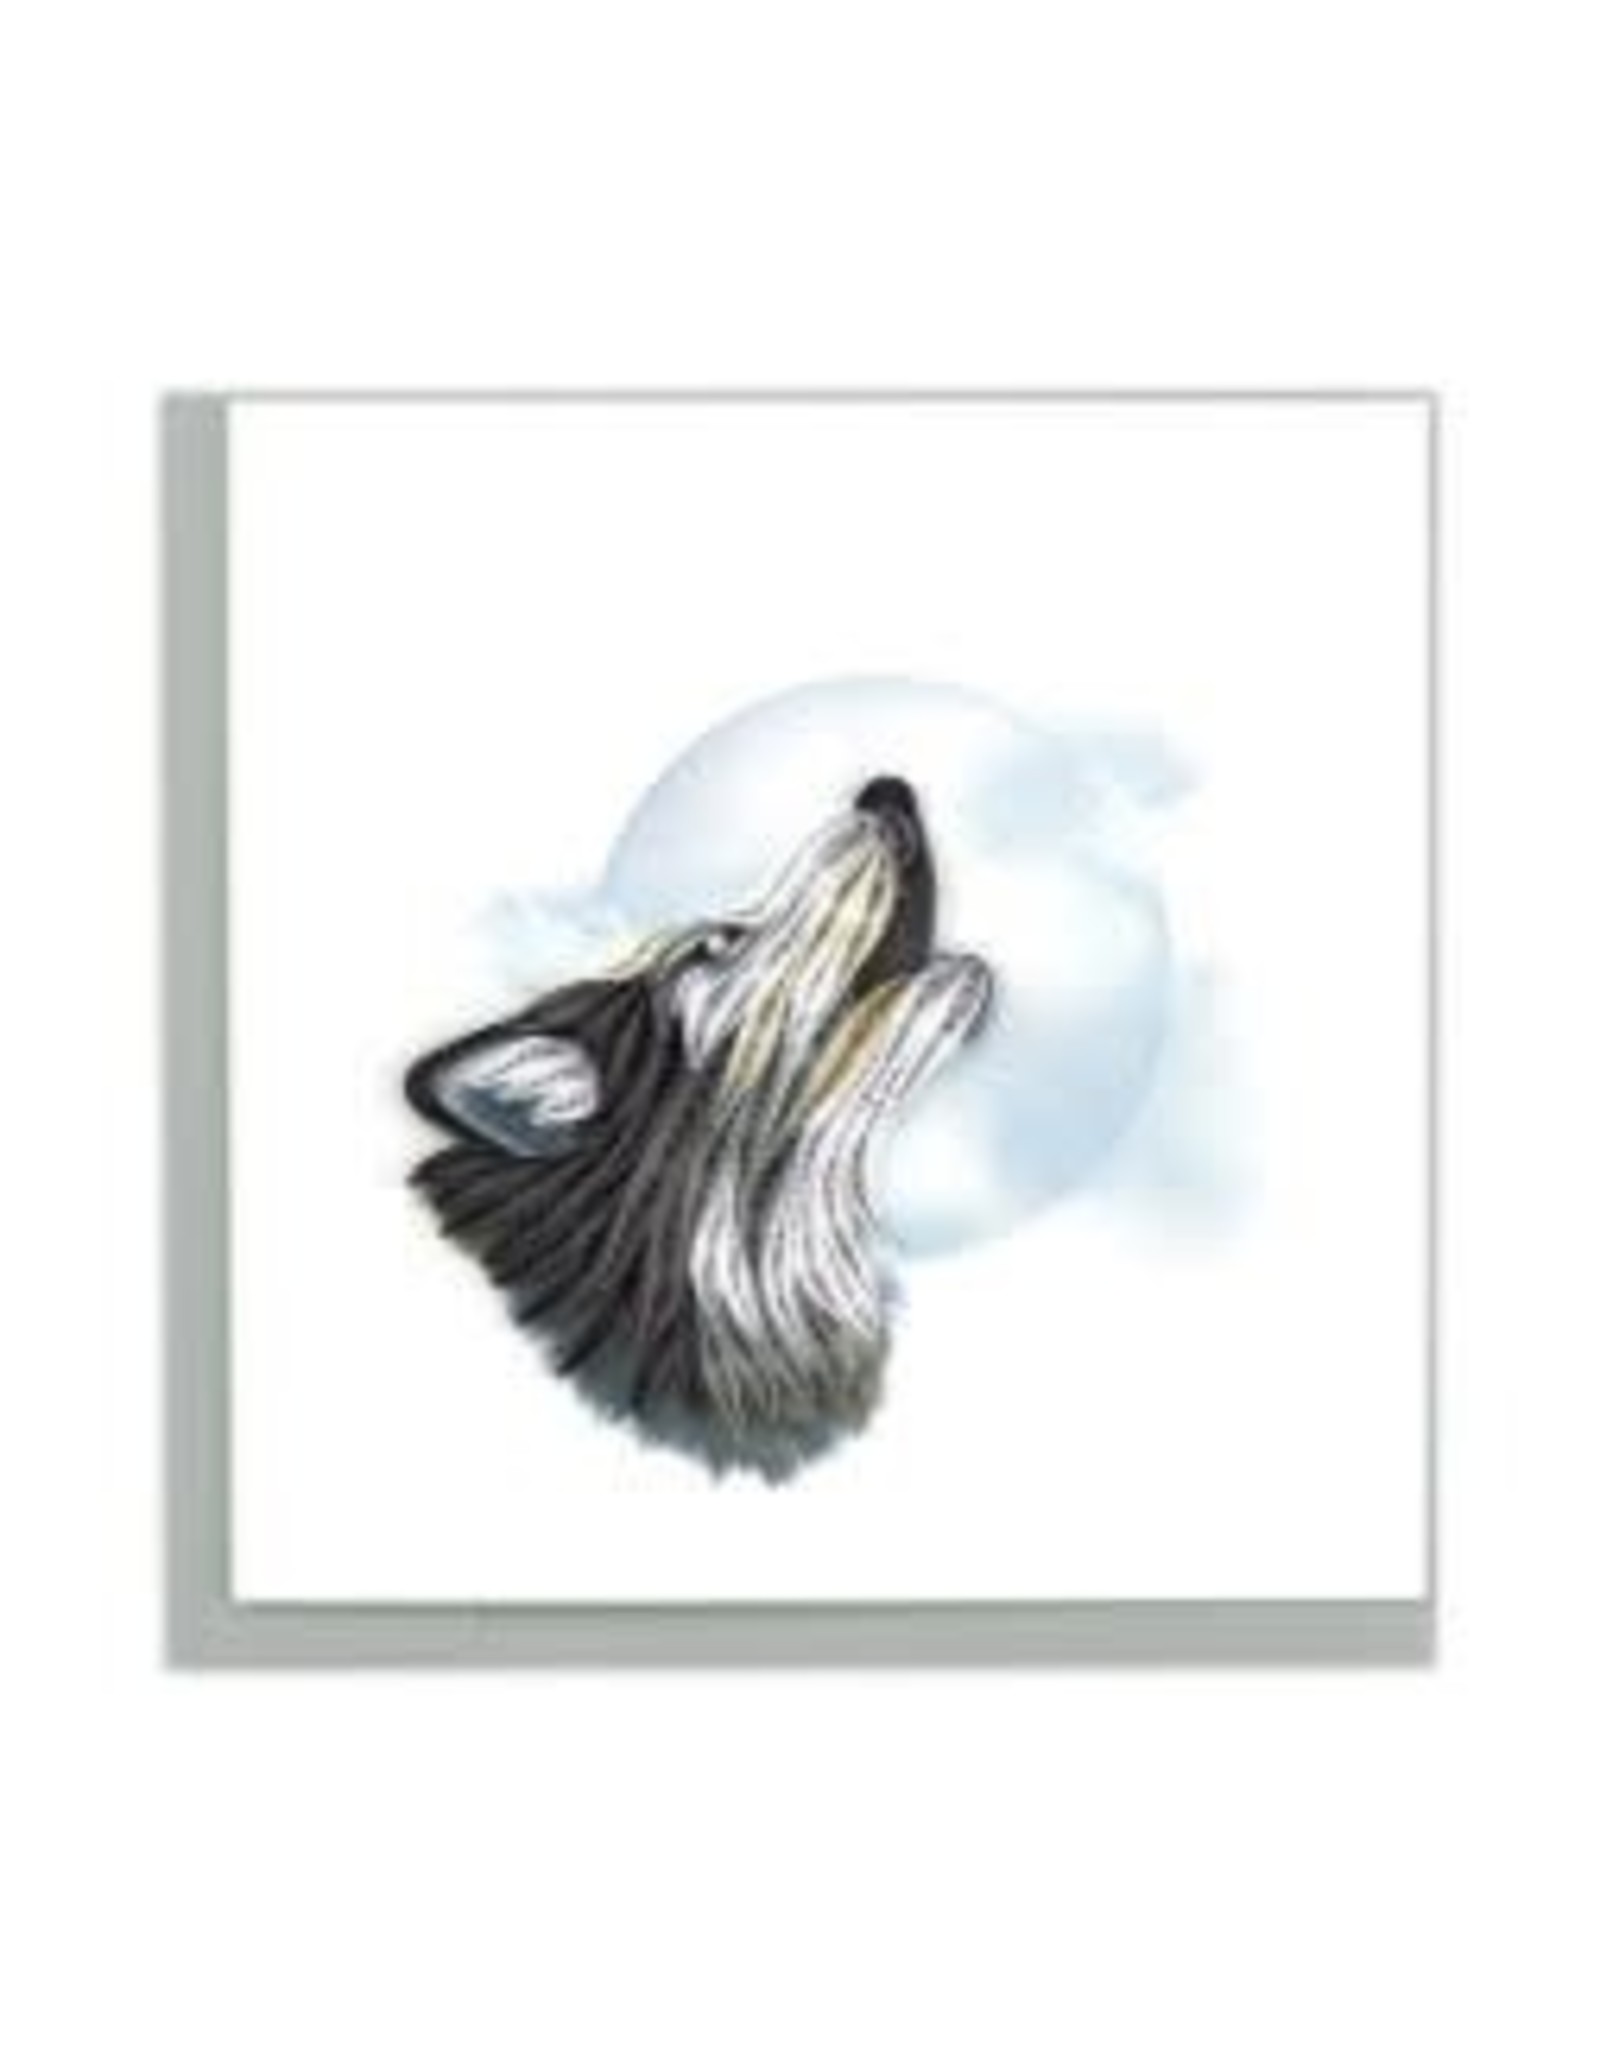 Quilling Card Lg- Wolf